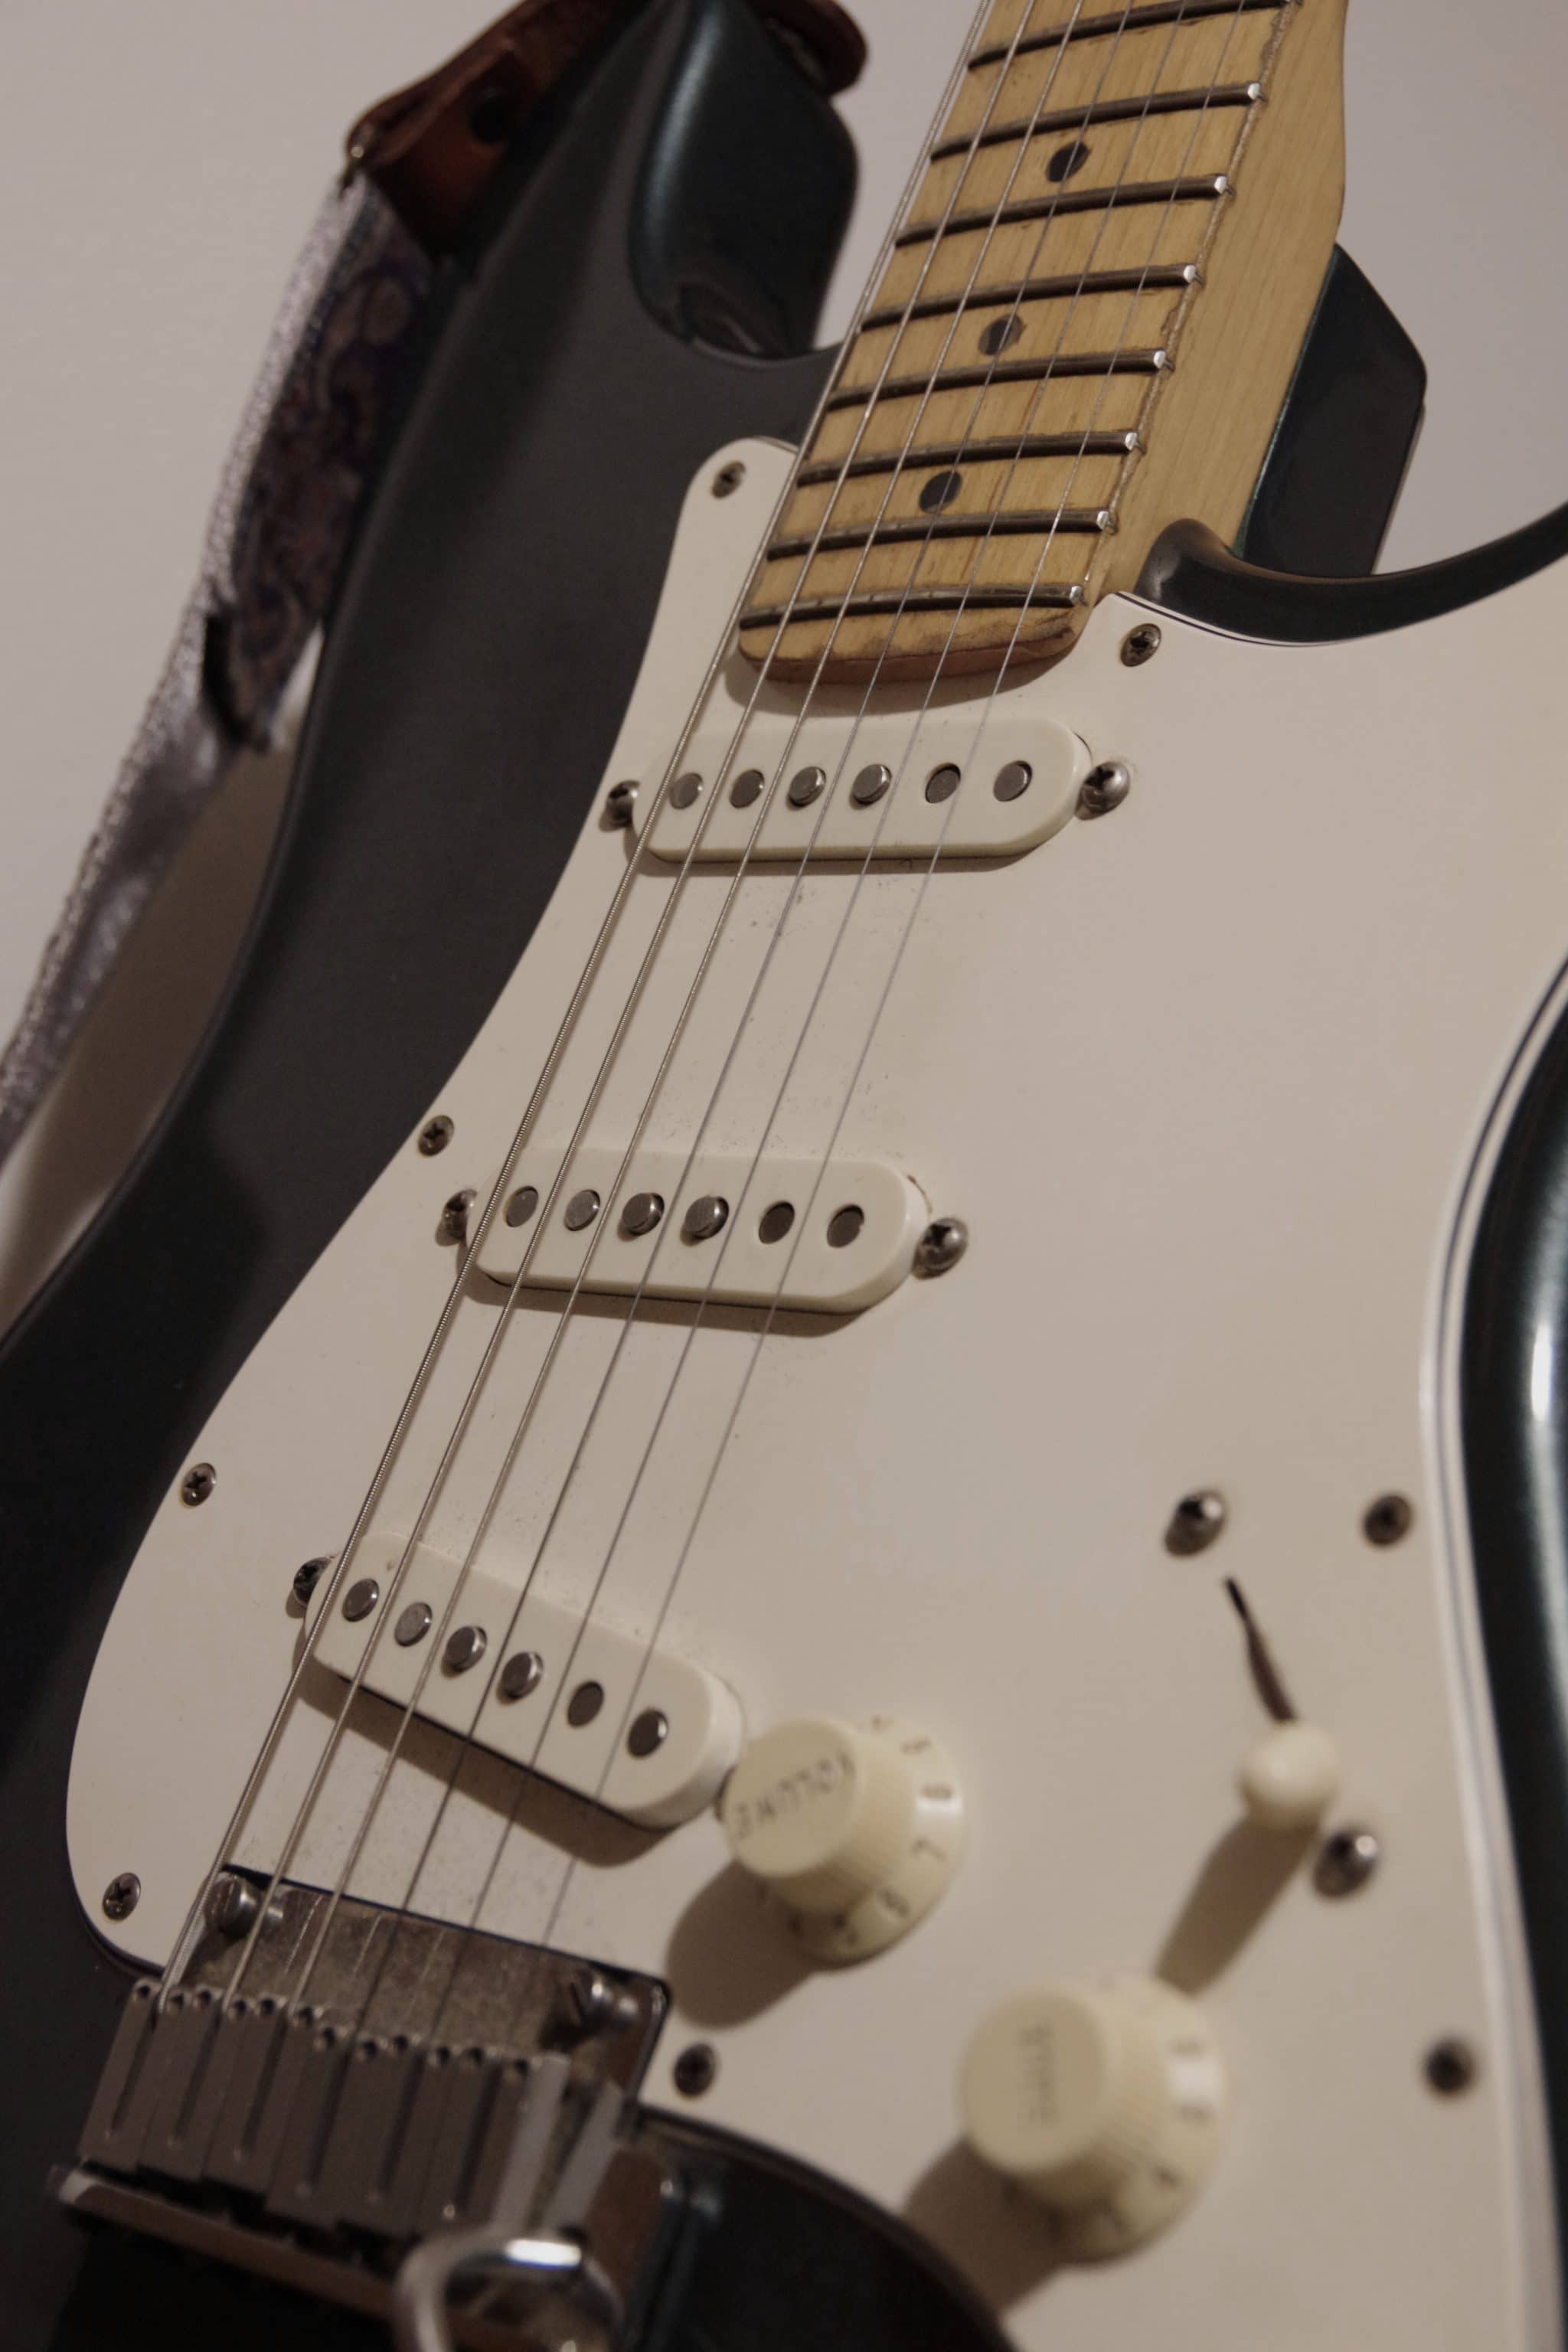 The Basics of Electric Guitar Pickups